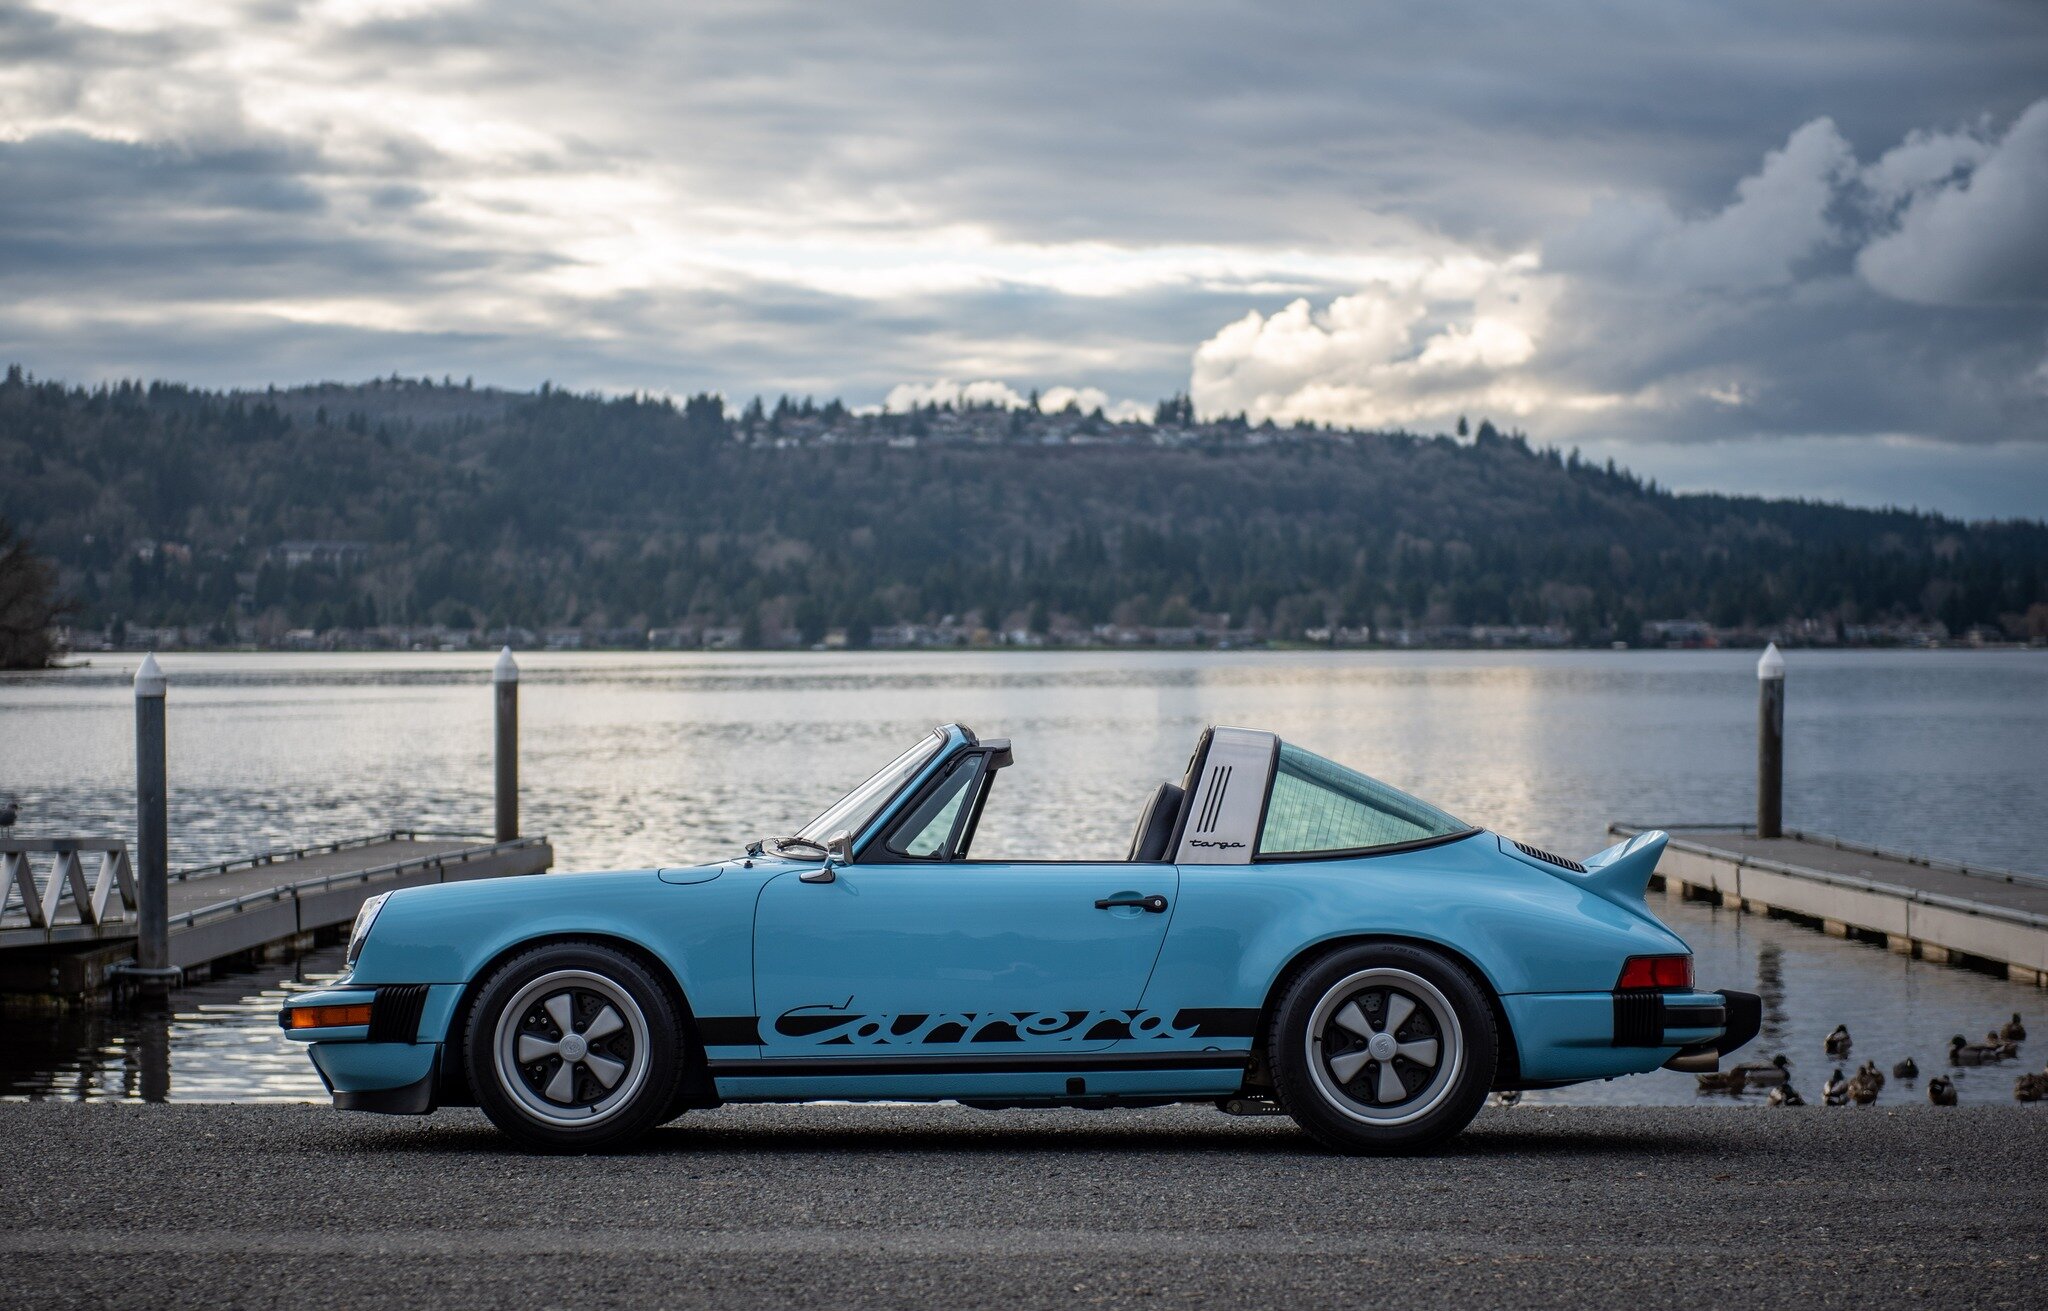 Gulf Blue, 2.8 Twin Plug RSR Spec, Ohlins, Two sets of wheels, fully sorted and event proven, rotisserie restoration - the list is too long for a social post. See all details on the site. Tasteful and focused build wtih attention to every detail. 197